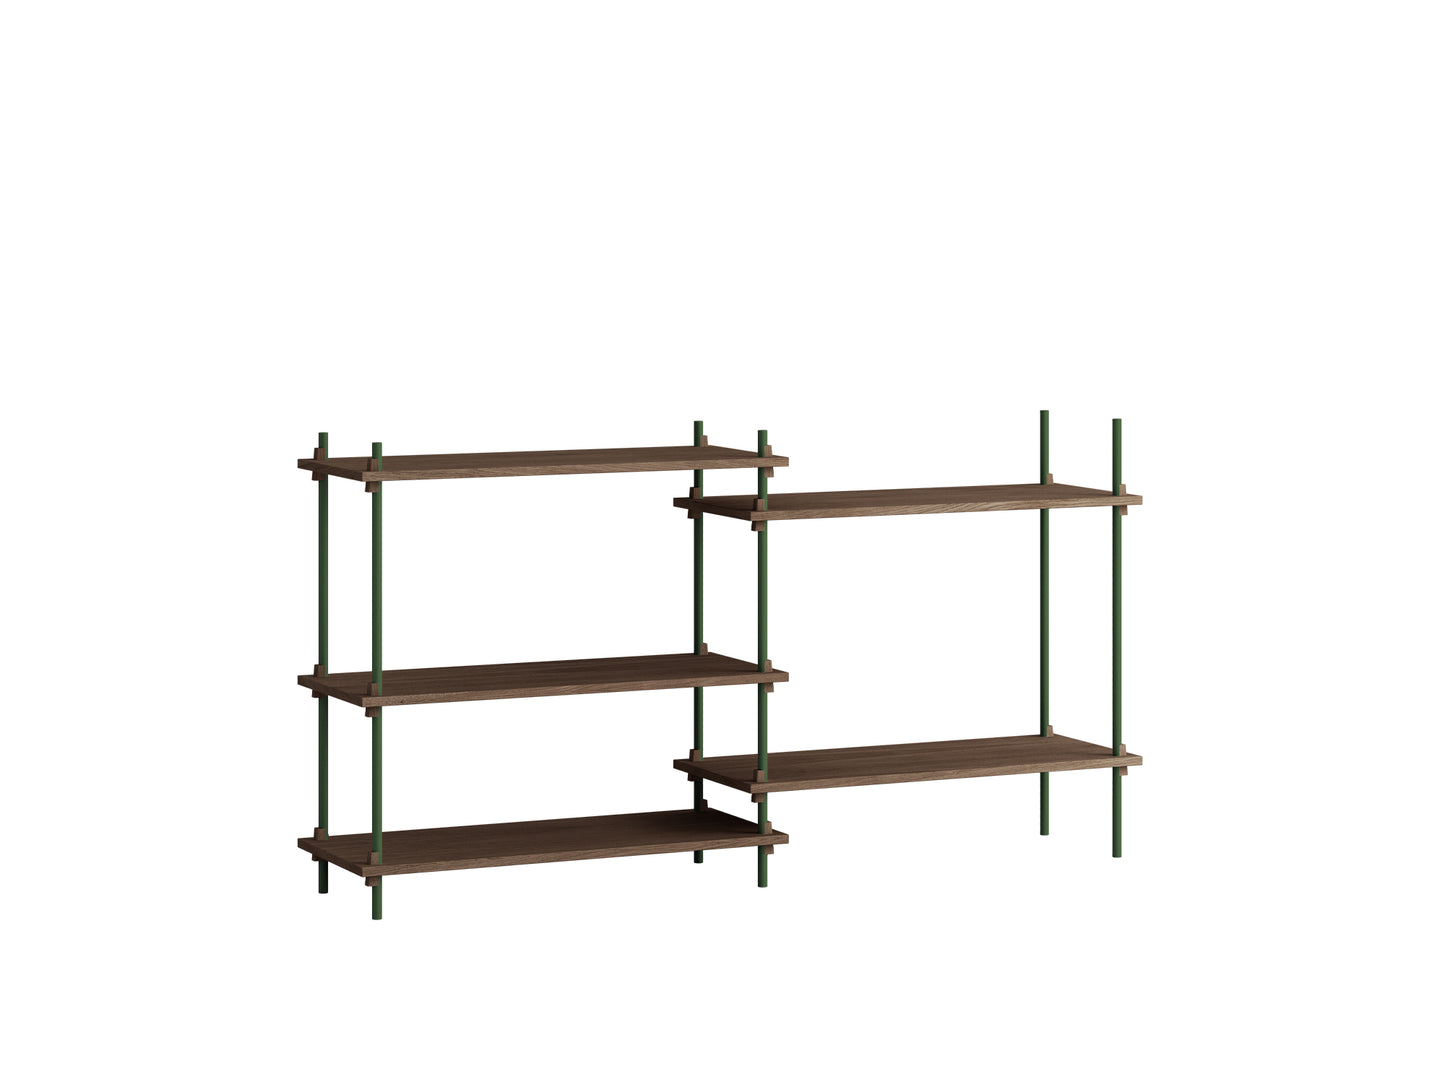 Moebe Shelving System - S.85.2.A Set in Pine Green / Smoked Oak